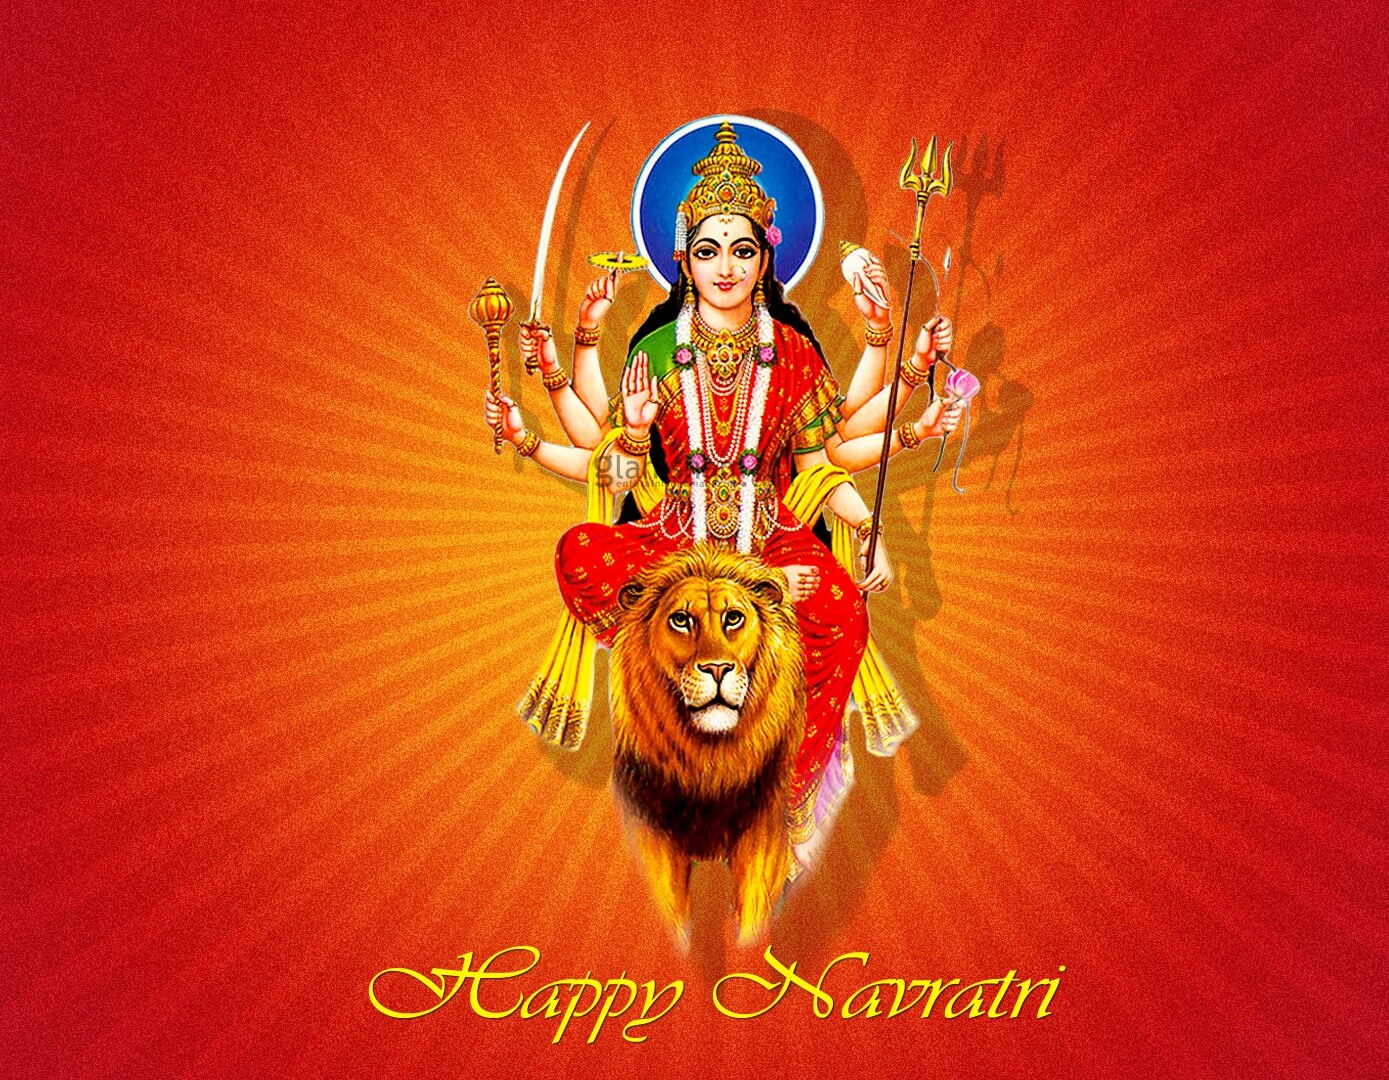 Happy Navratri Wishes, Images, Quotes, Sms, HD Wallpapers